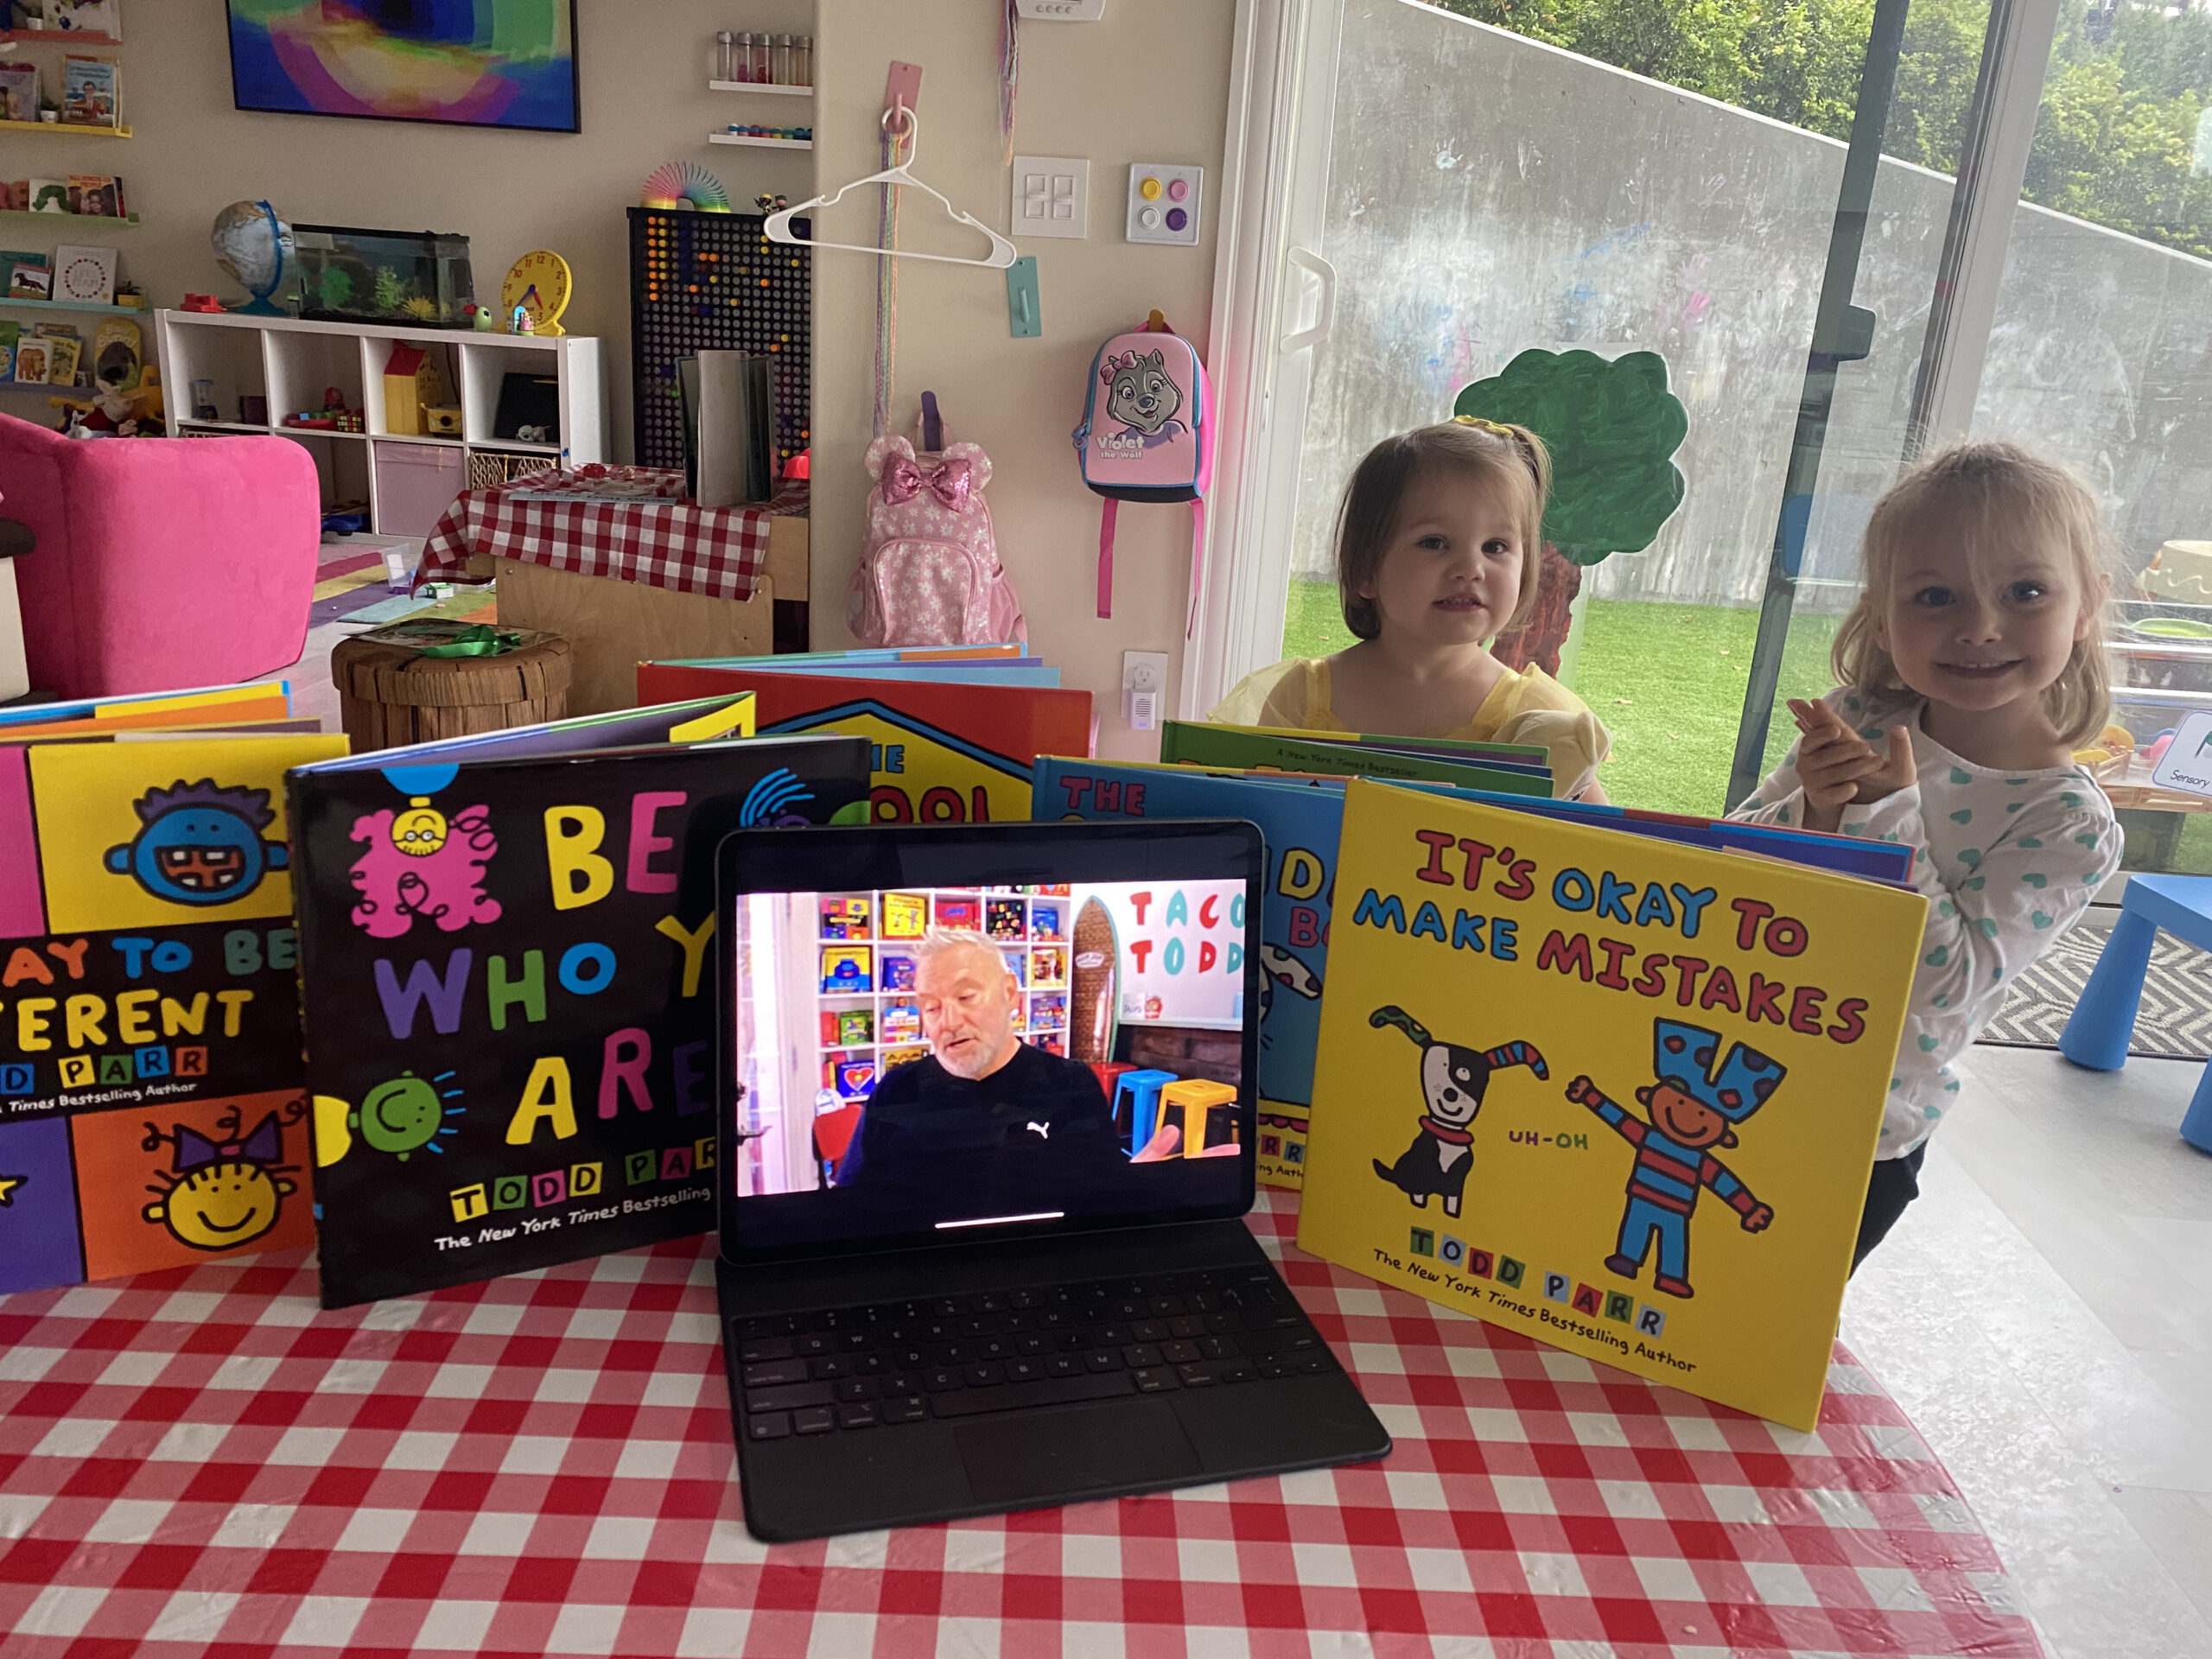 Increasing Confidence through Creativity: I have been using Art as a platform for increasing confidence in children for years so I'm excited to show you a few simple ideas you can do at home.